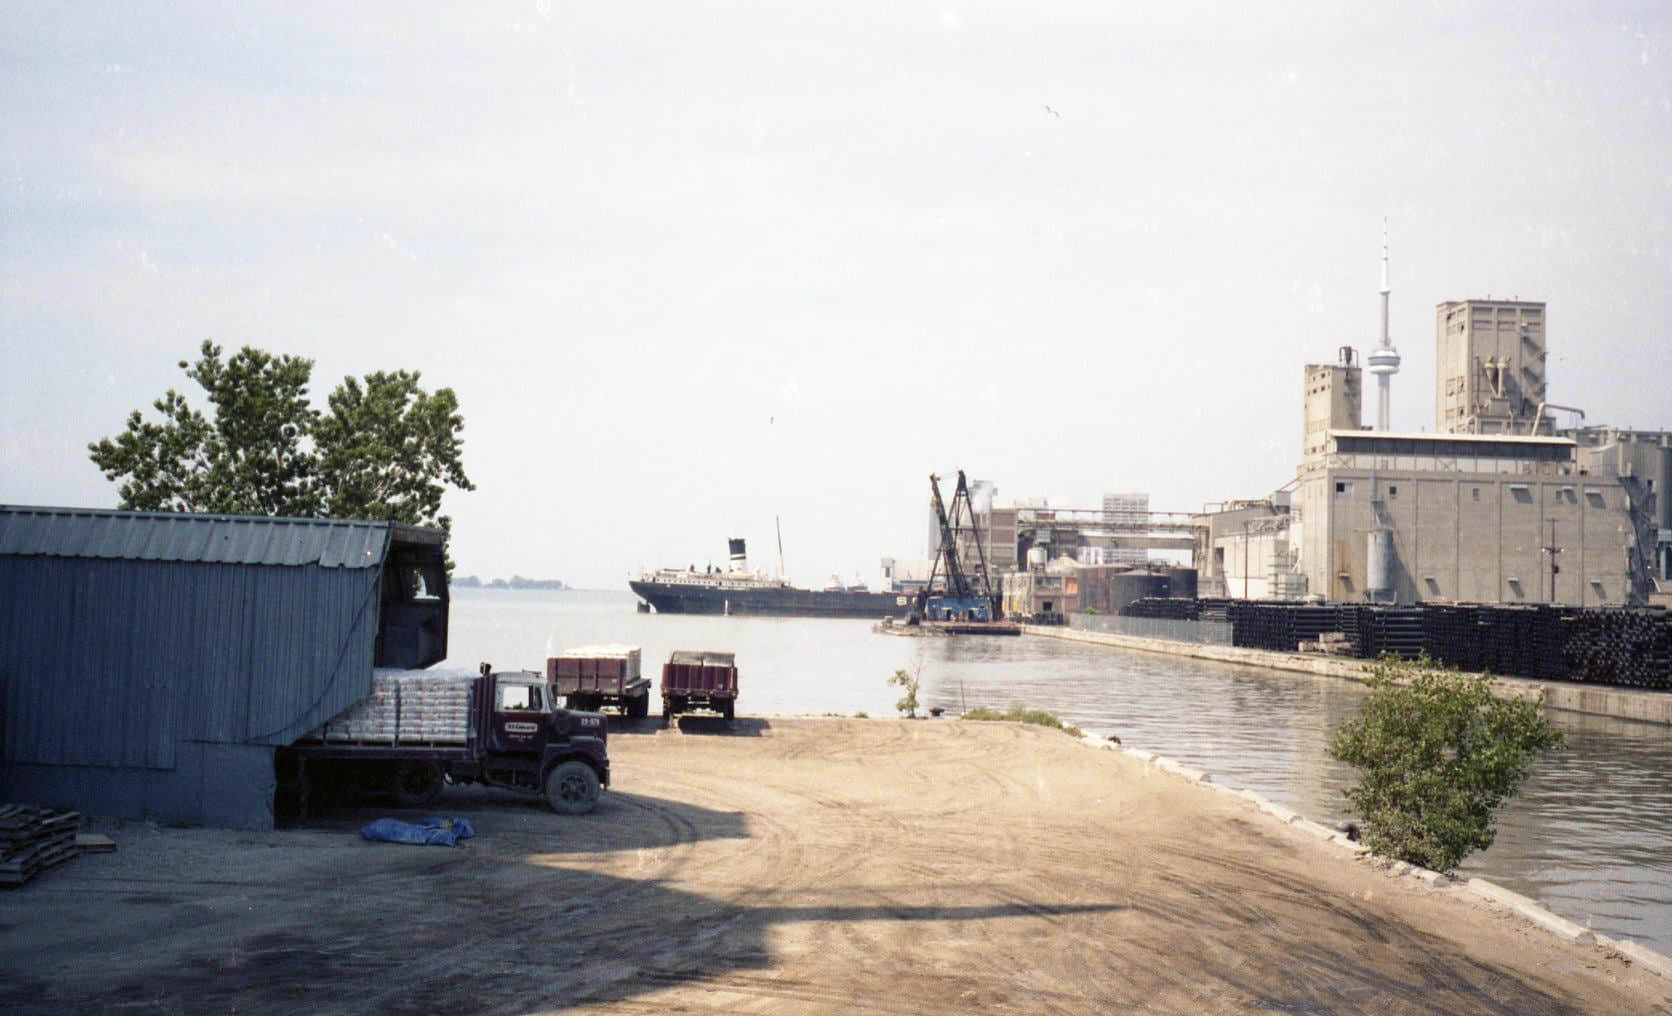 View looking west from the Toronto portlands, 1981.